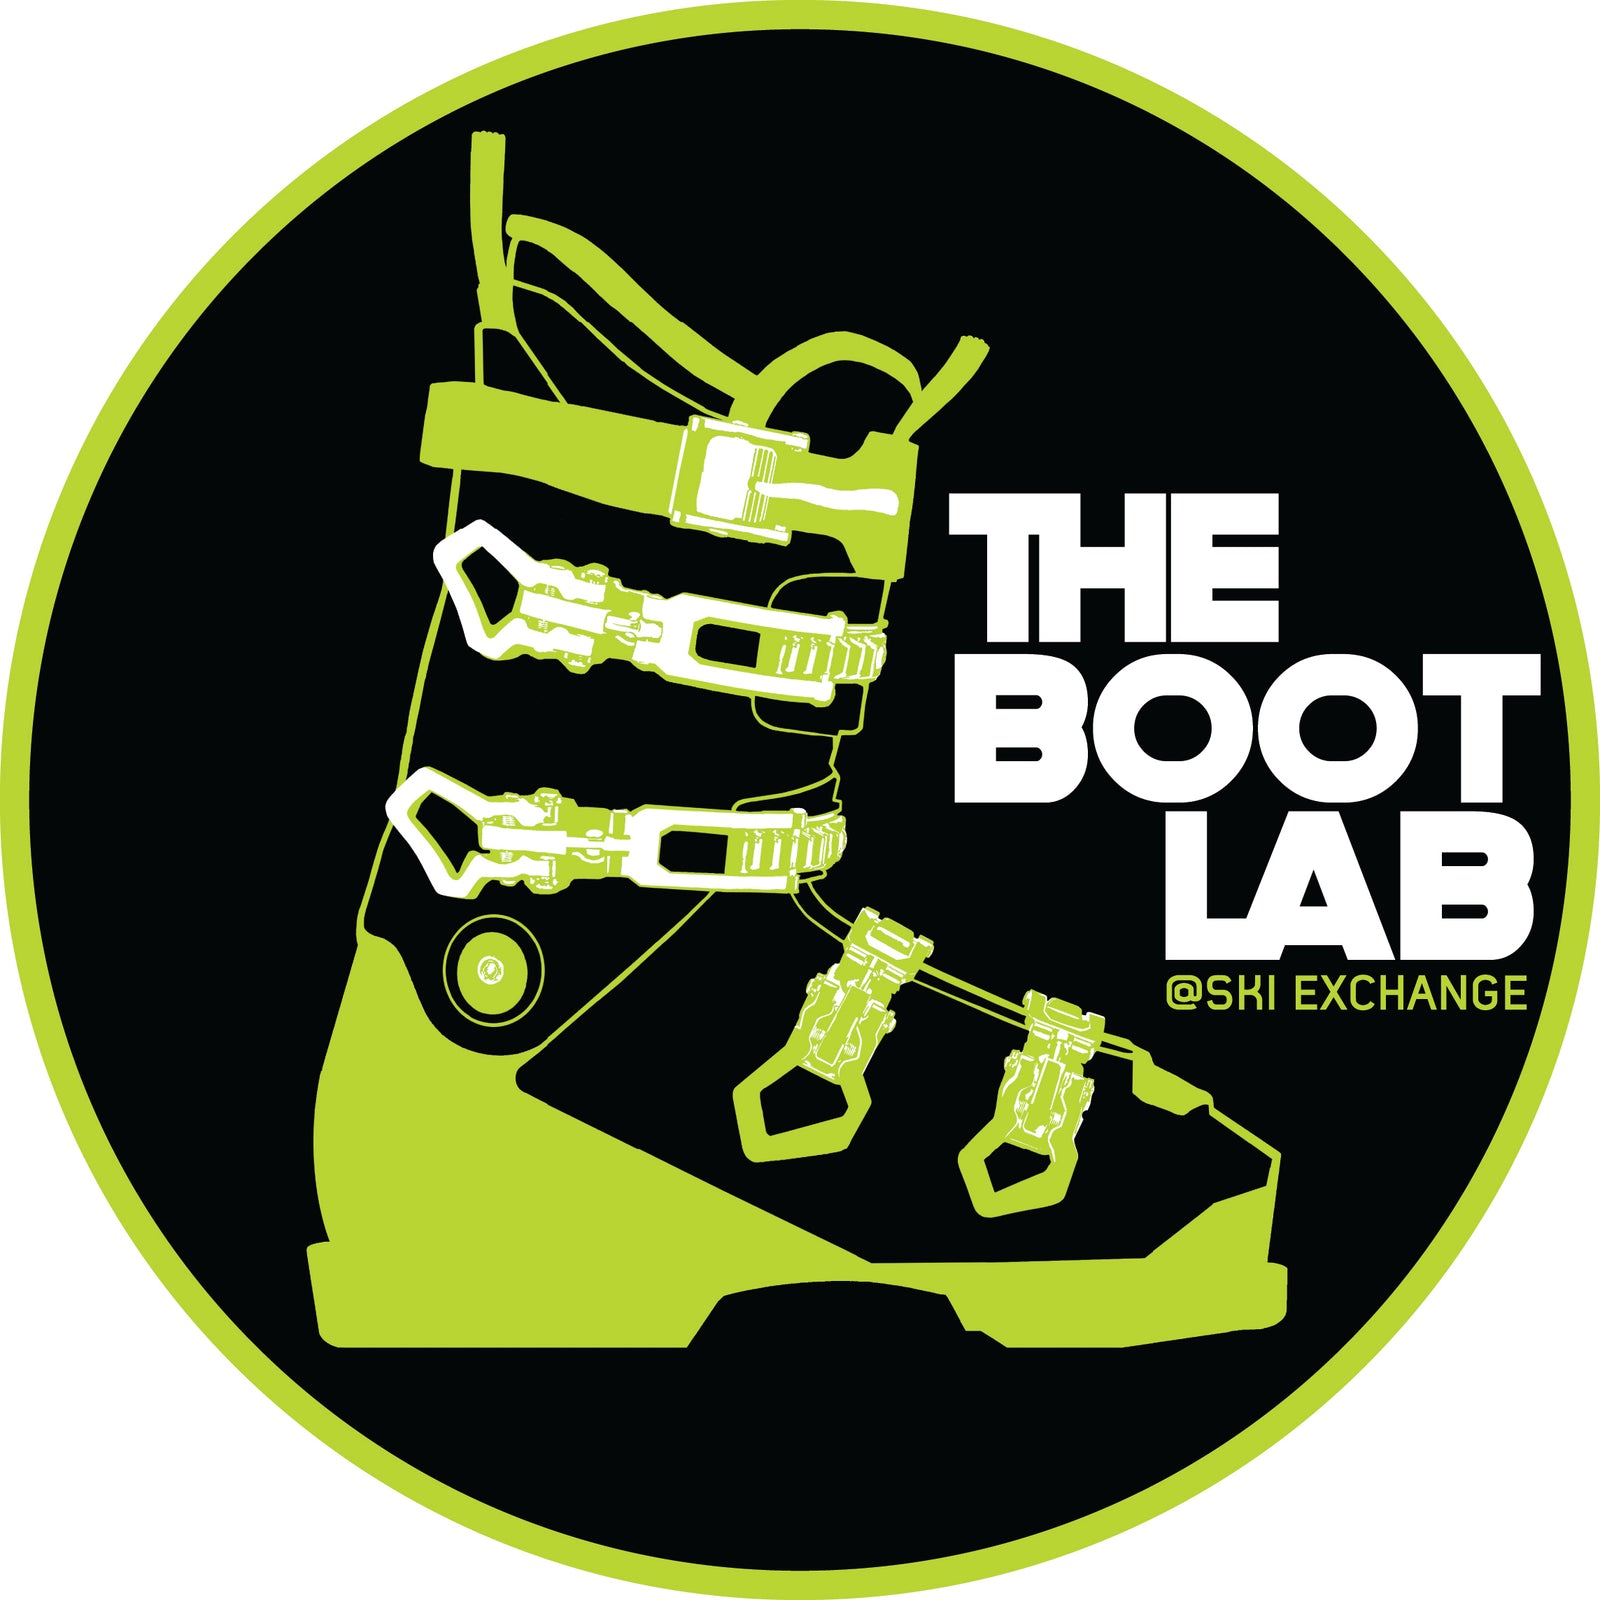 Why is ski boot fitting so important?